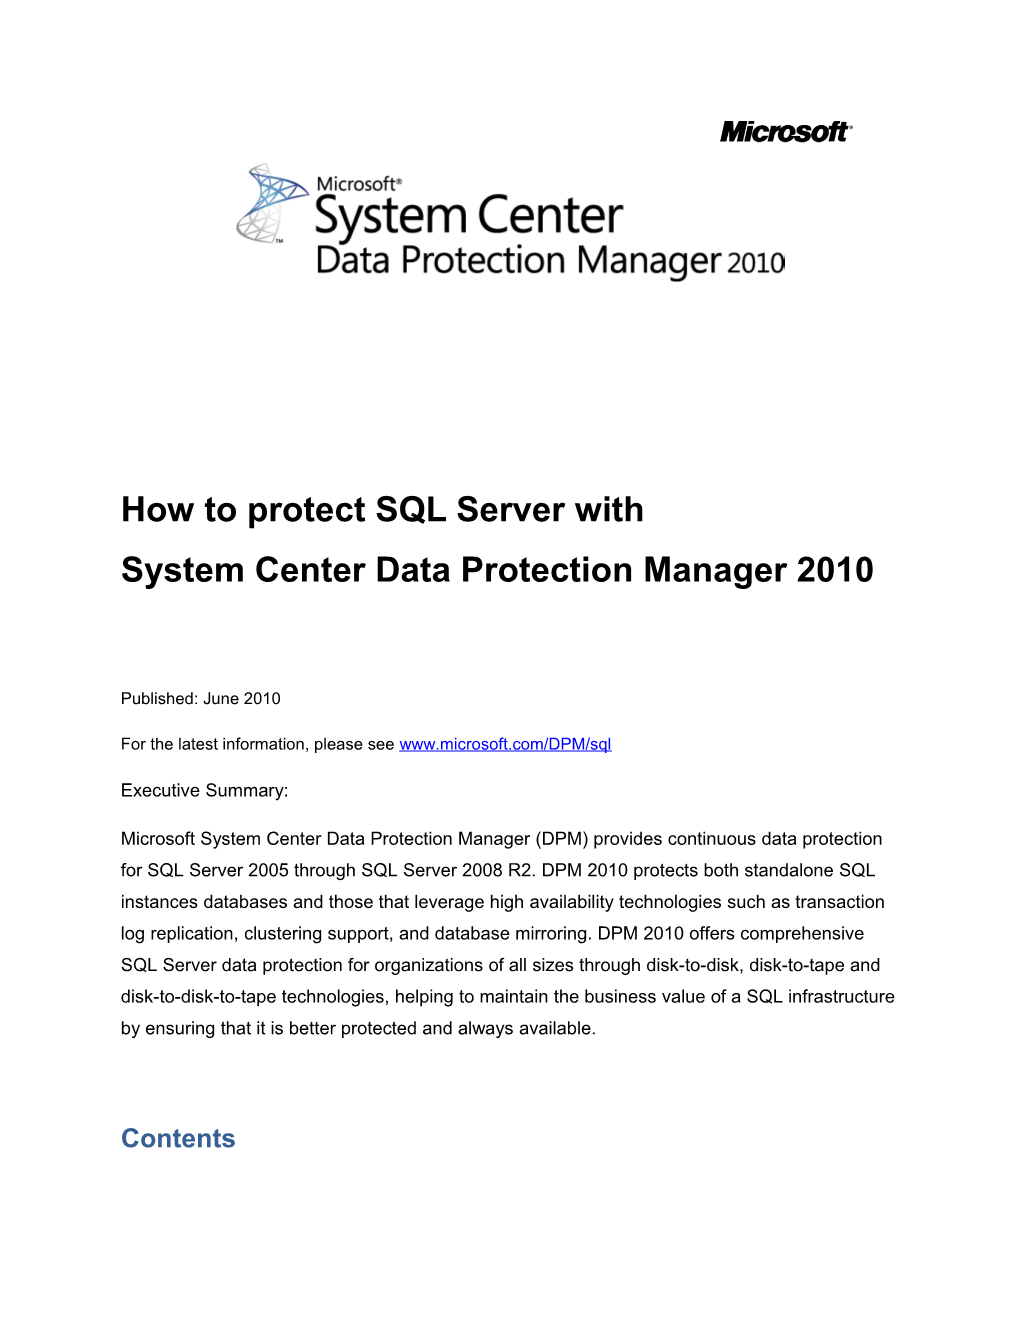 How To Protect SQL Server With DPM 2010